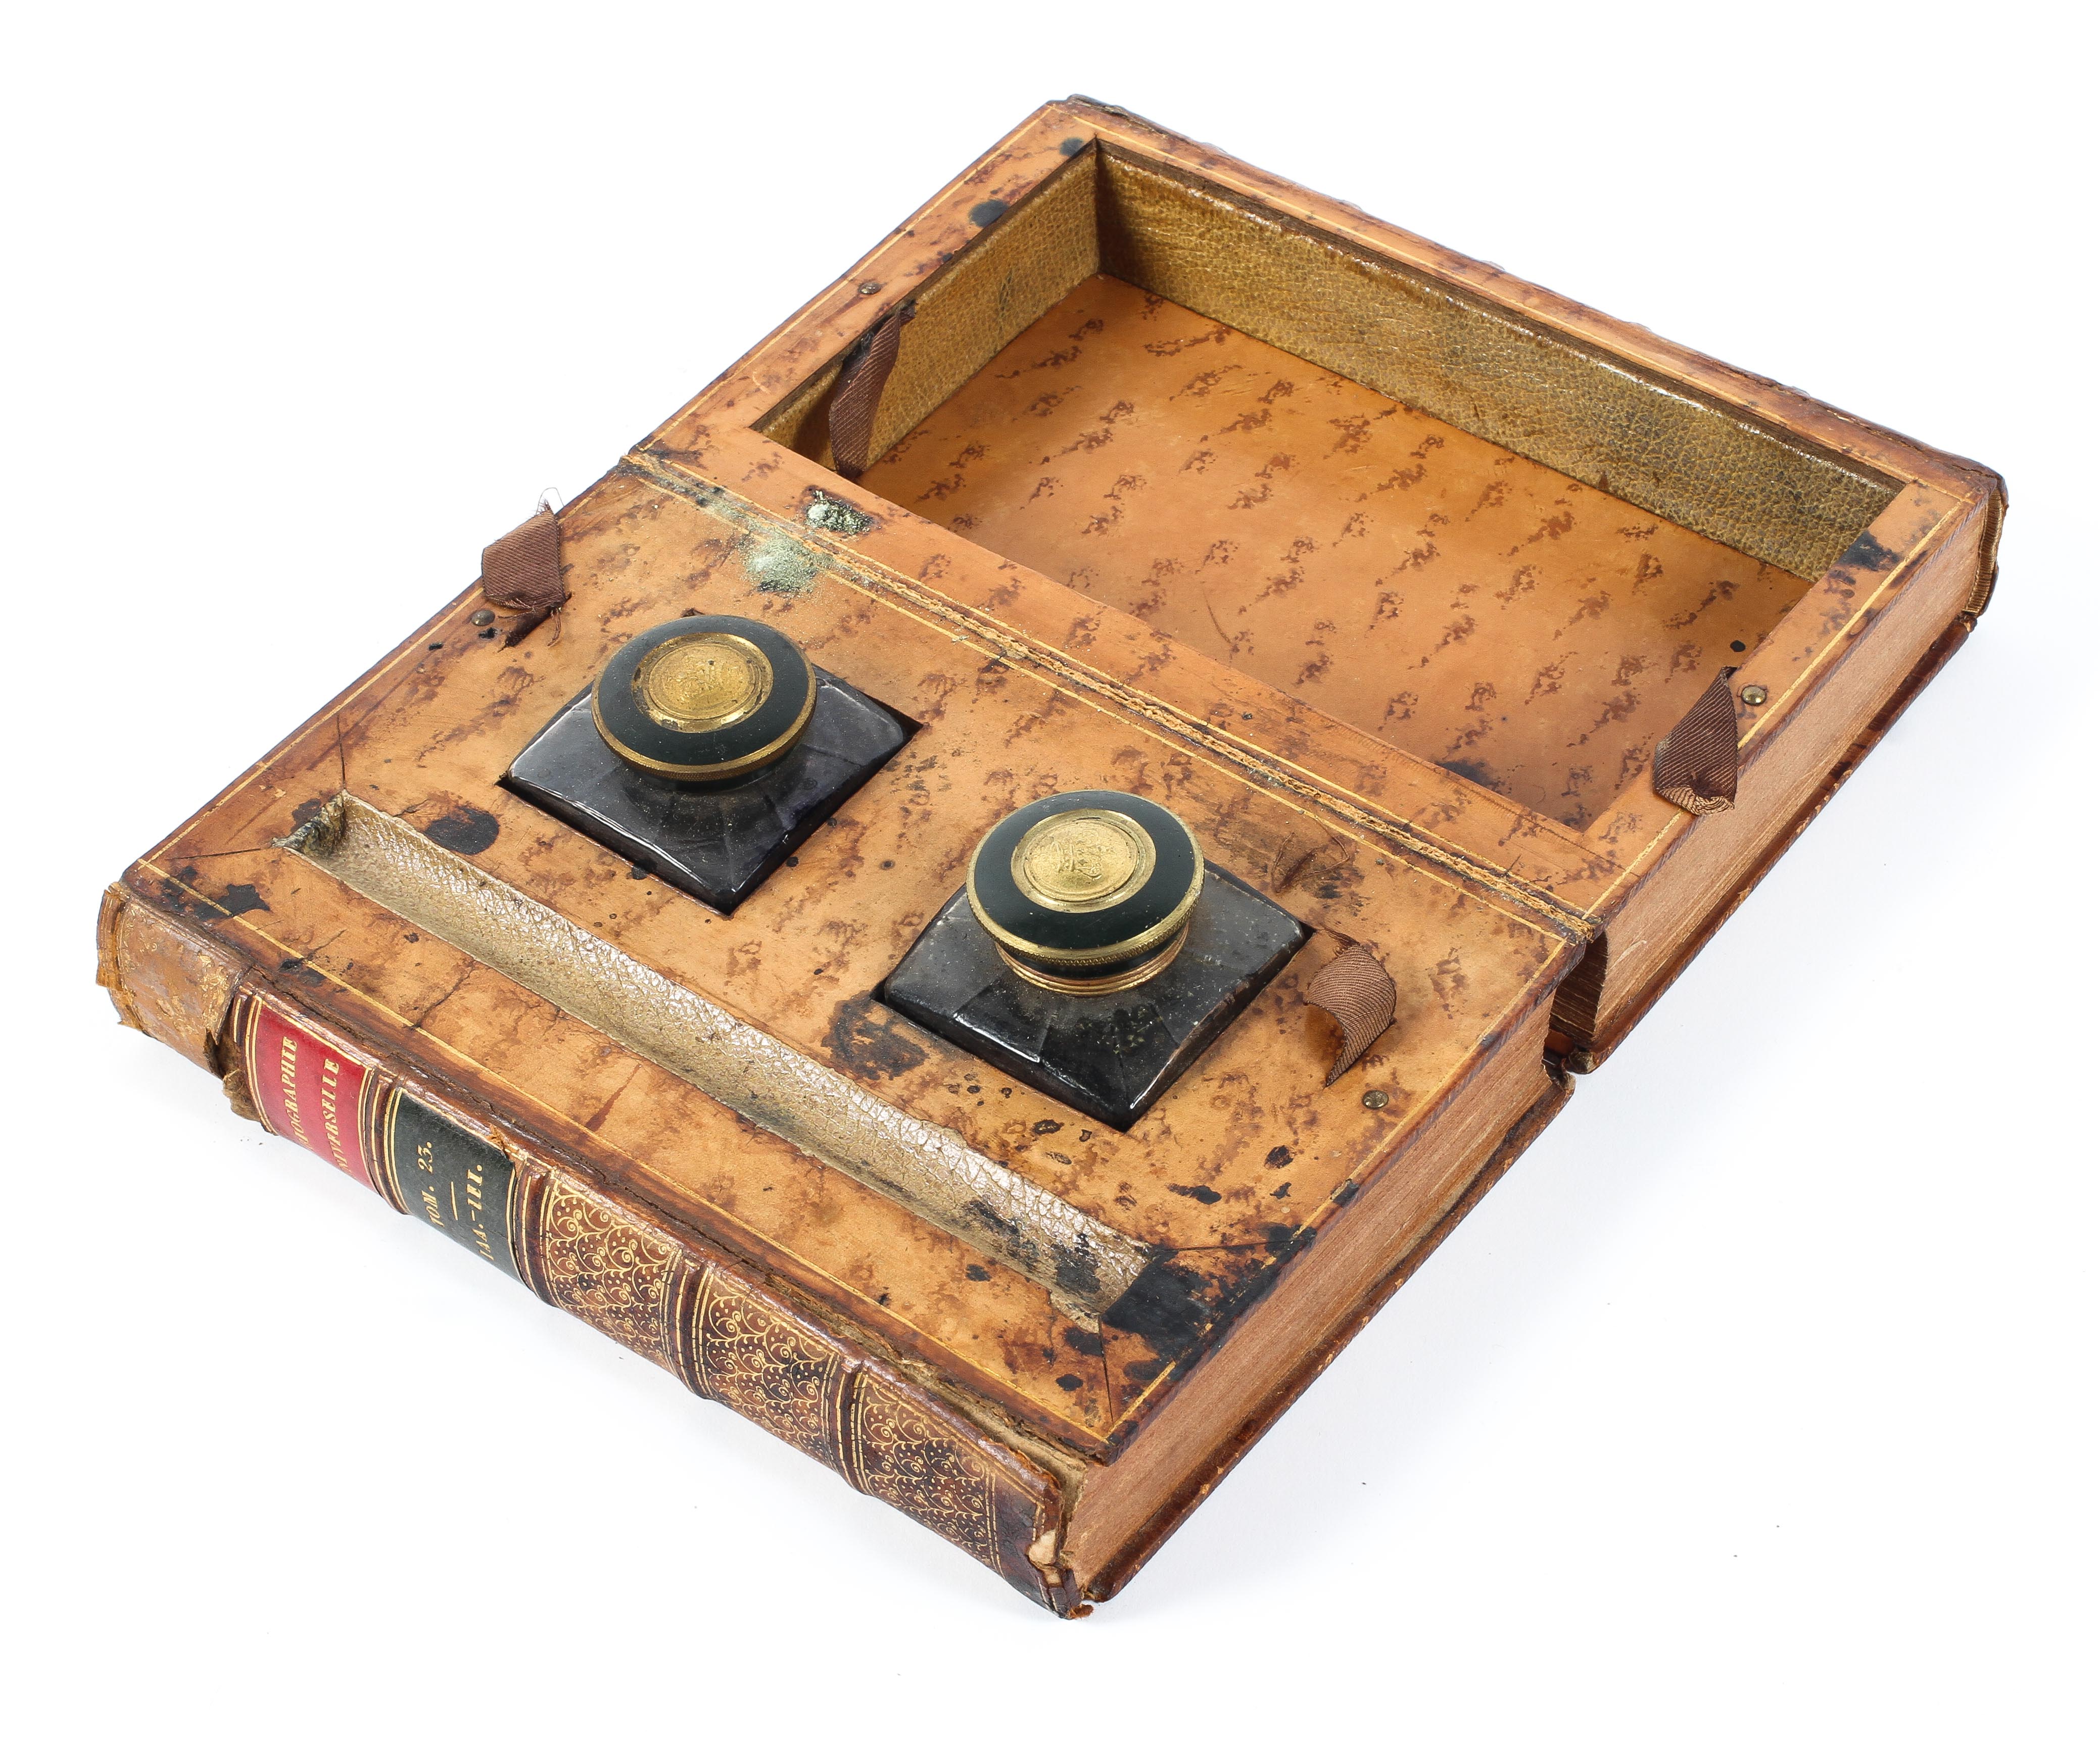 A 19th century twin inkwell in the form of a leather bound book titled Biographie Universelle,